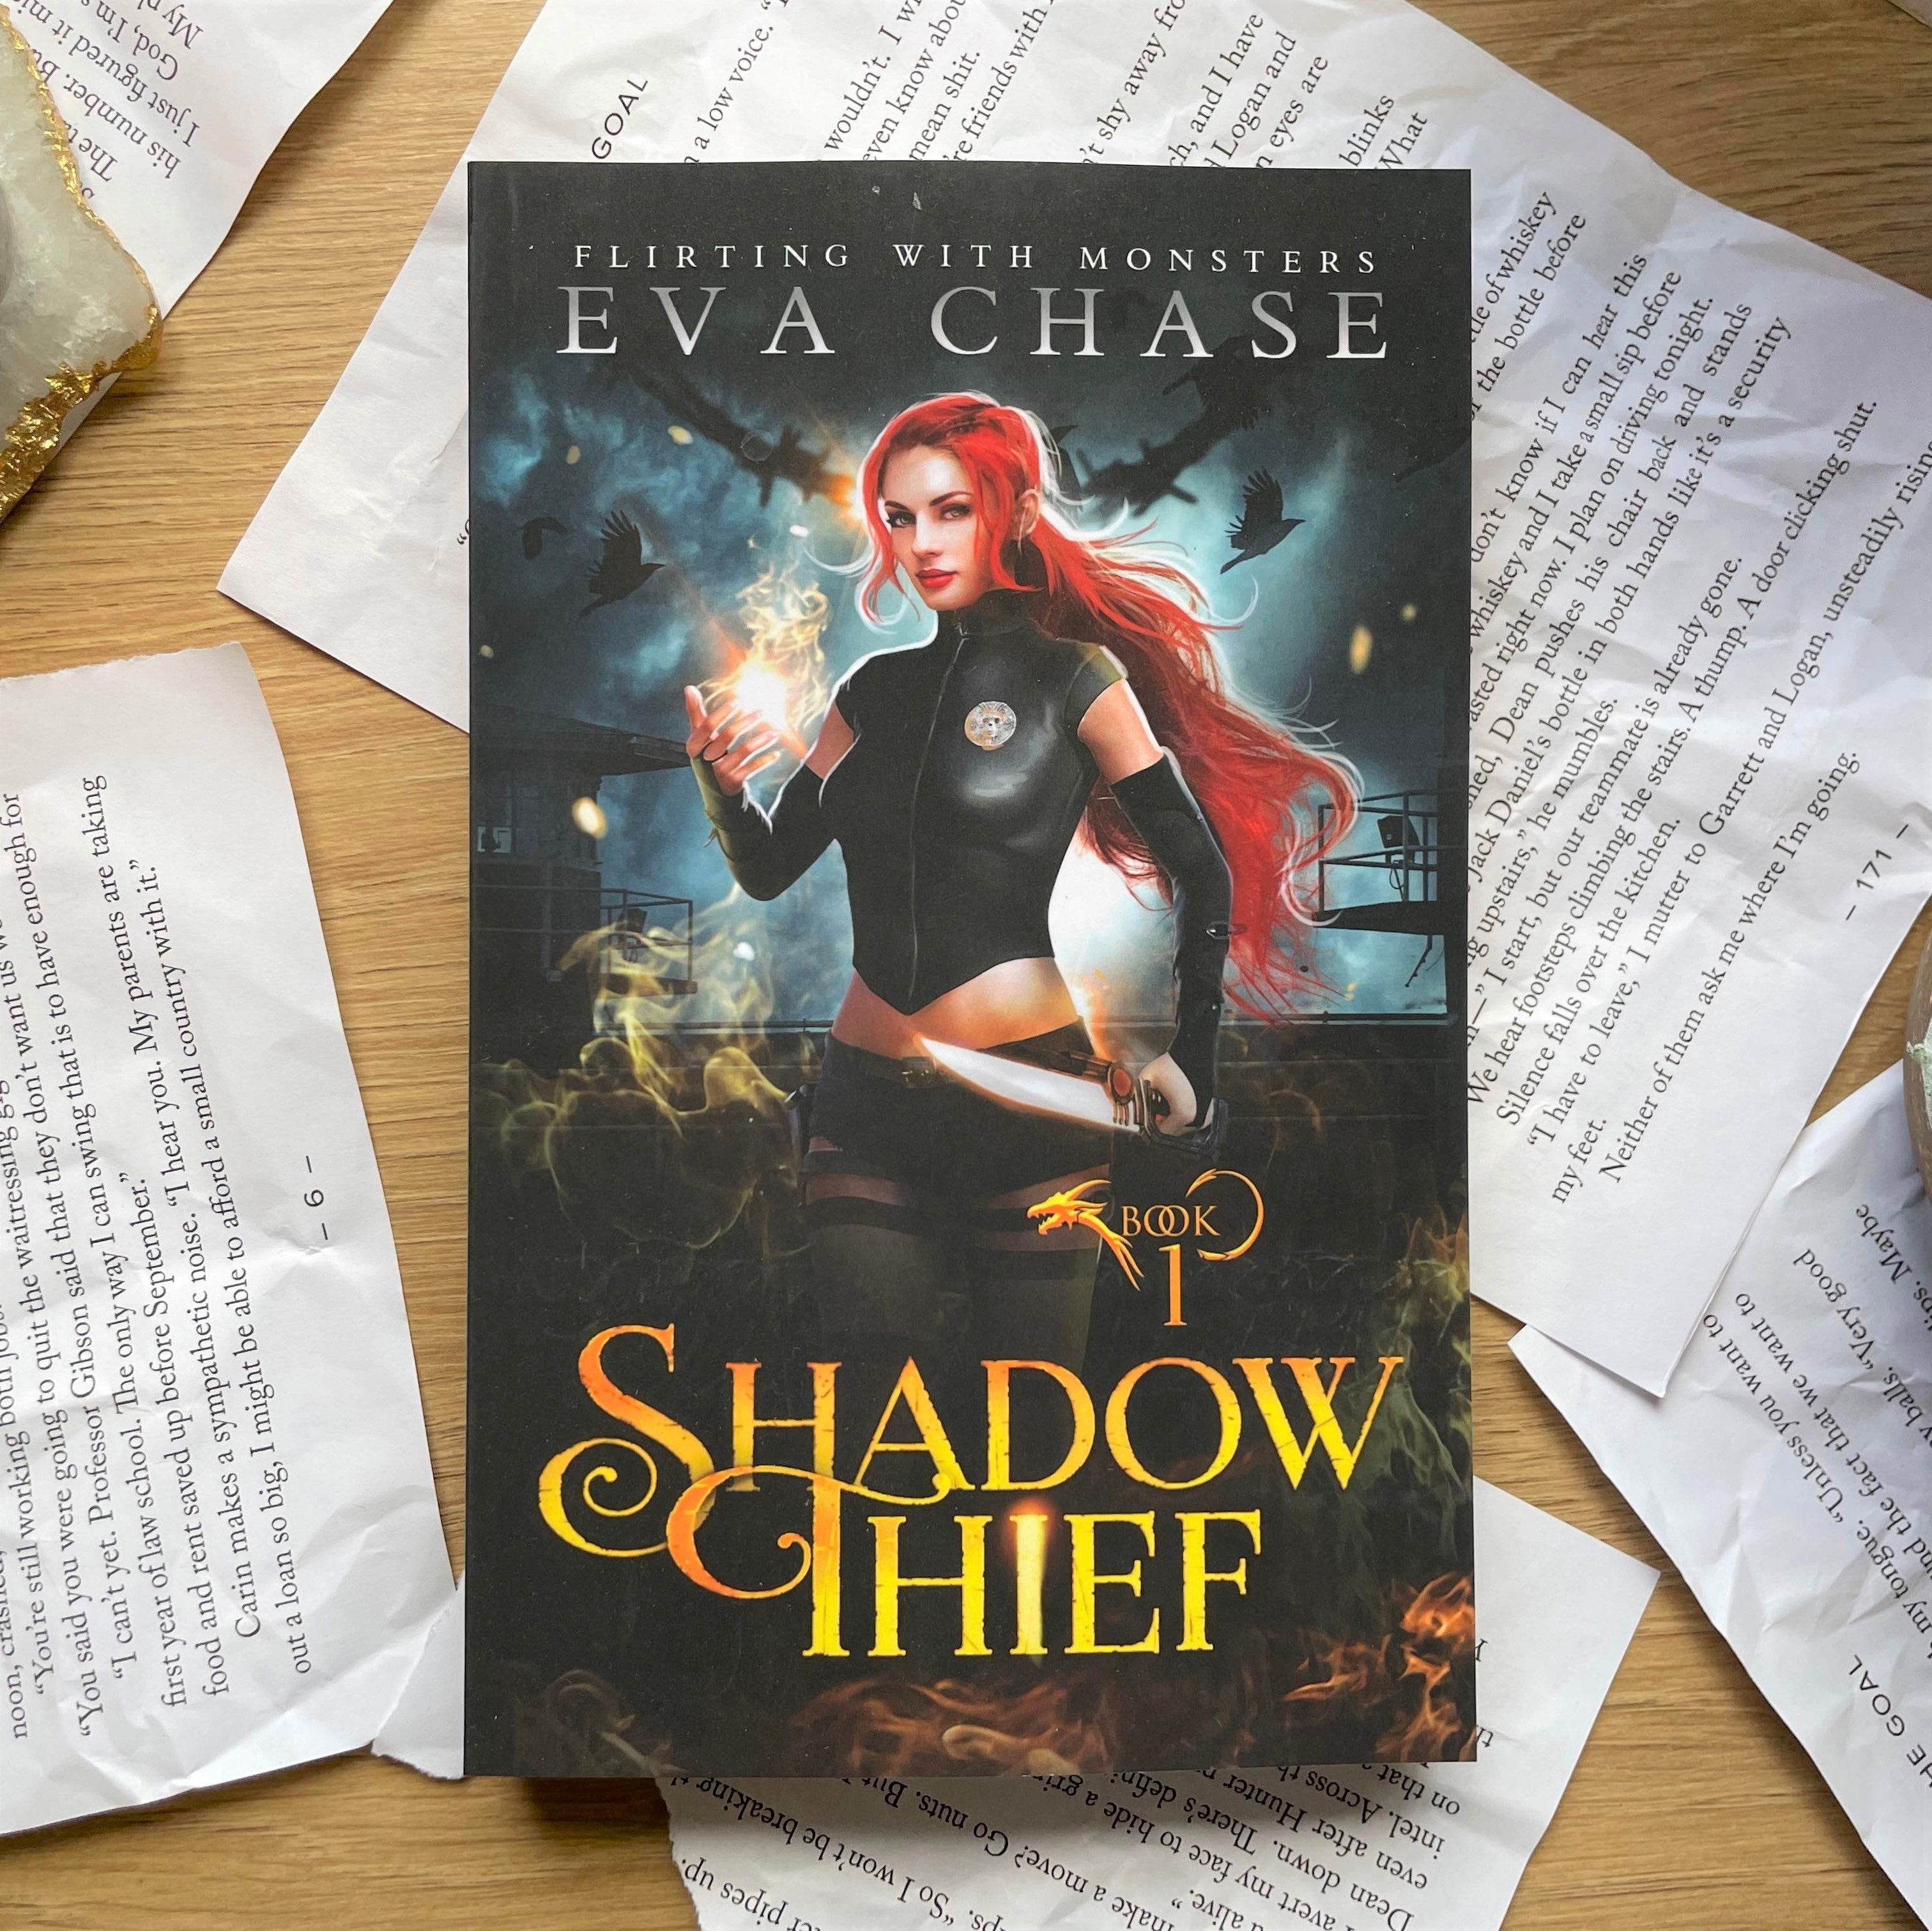 Flirting with Monsters by Eva Chase